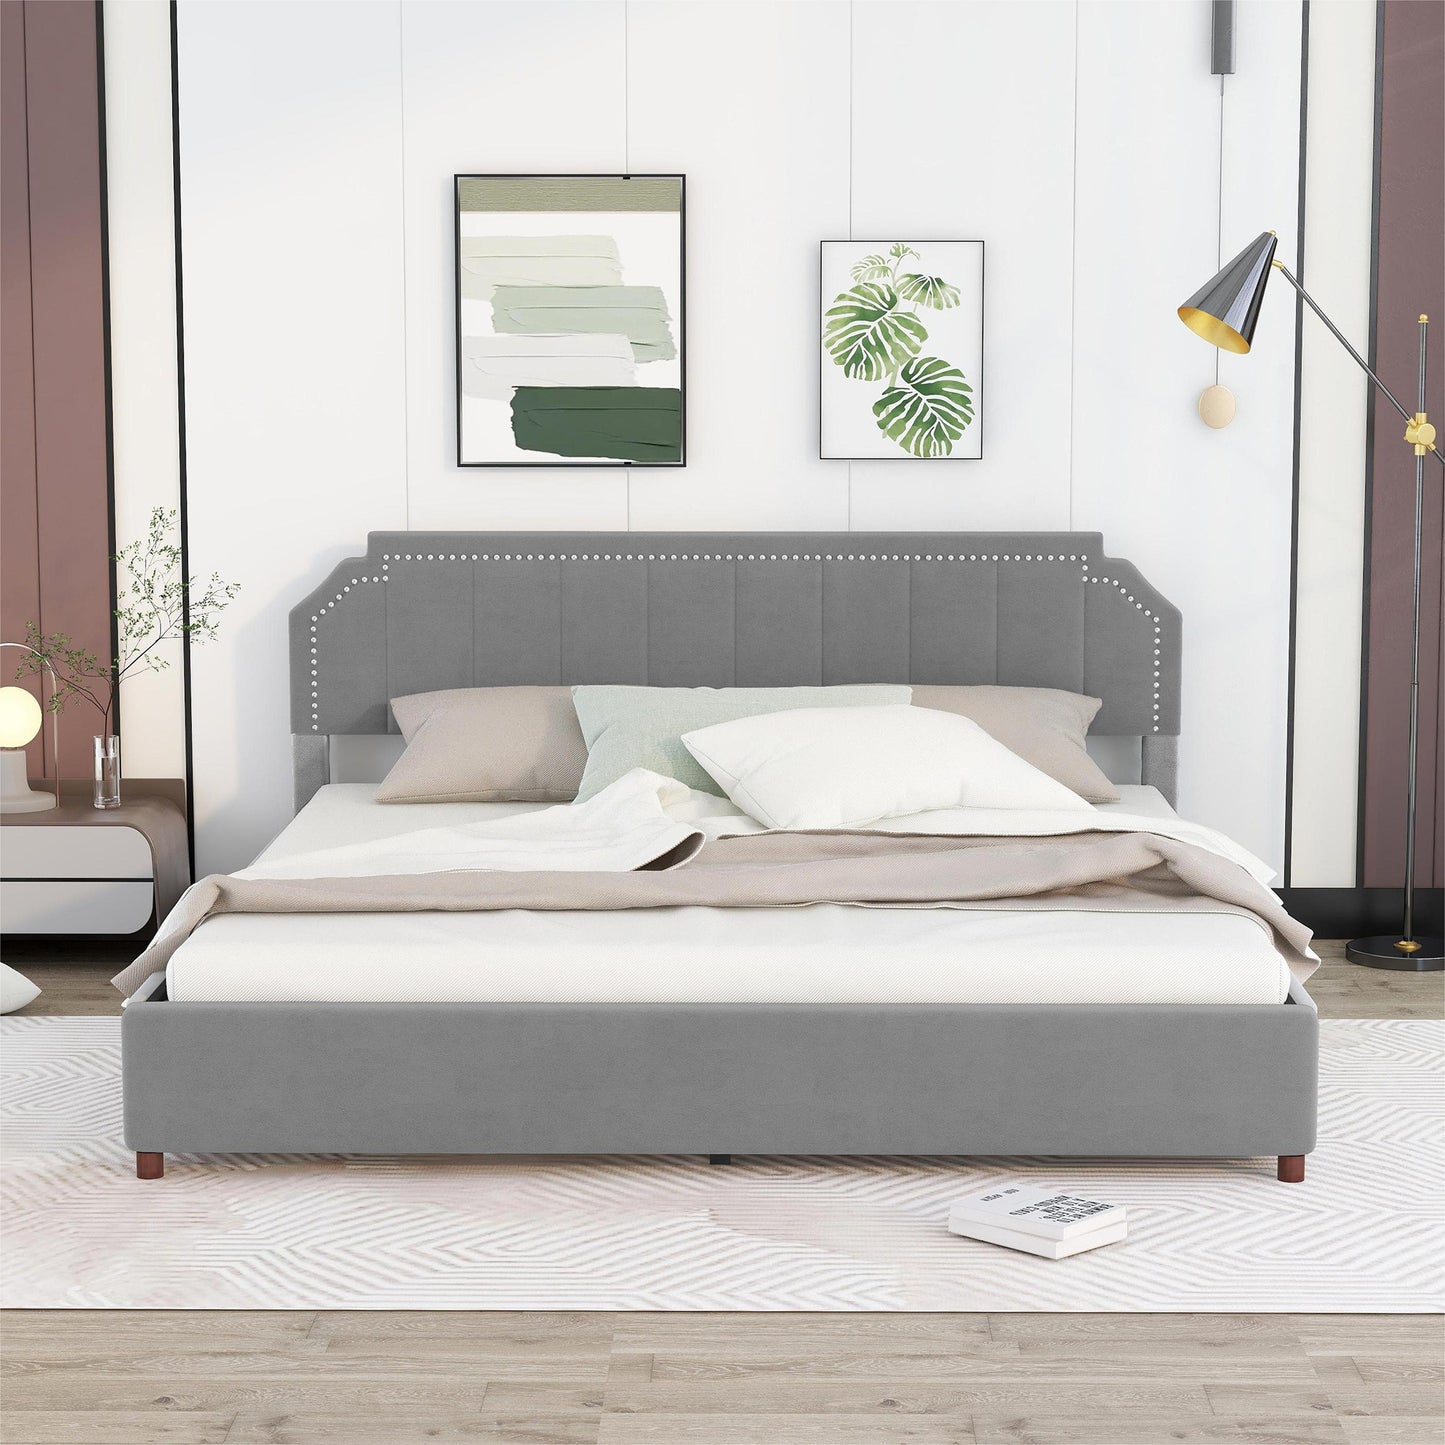 King Size Upholstery Platform Bed with Four Storage Drawers,Support Legs,Grey